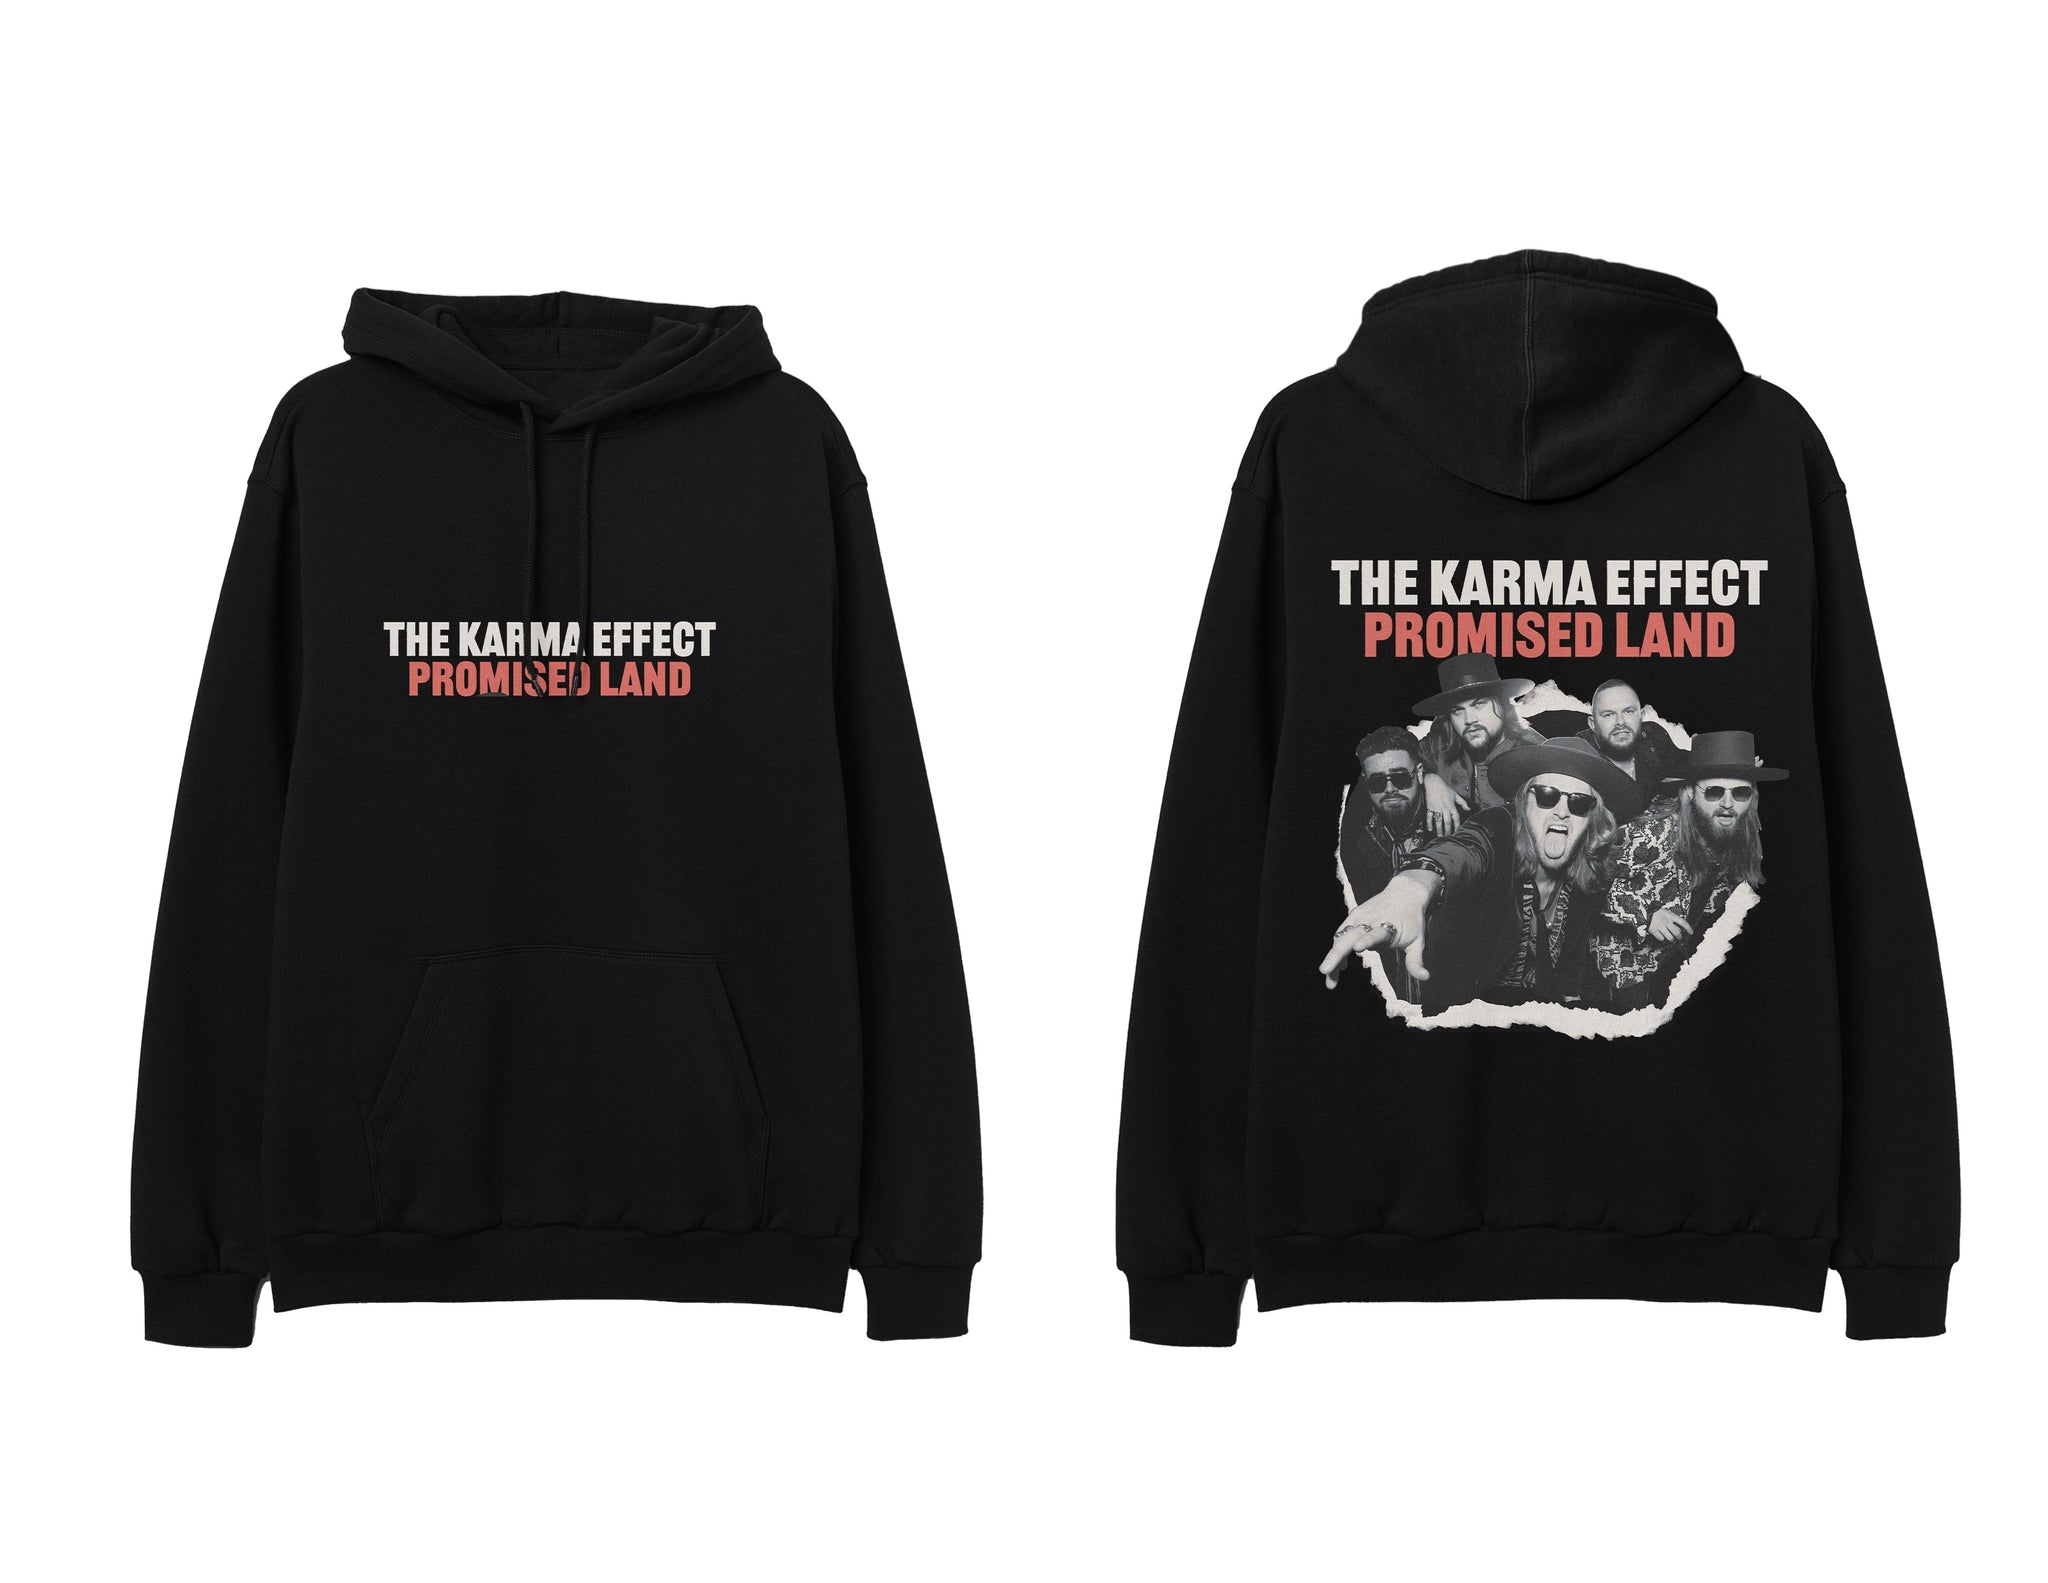 The Karma Effect "Promised Land" Pullover Hoodie